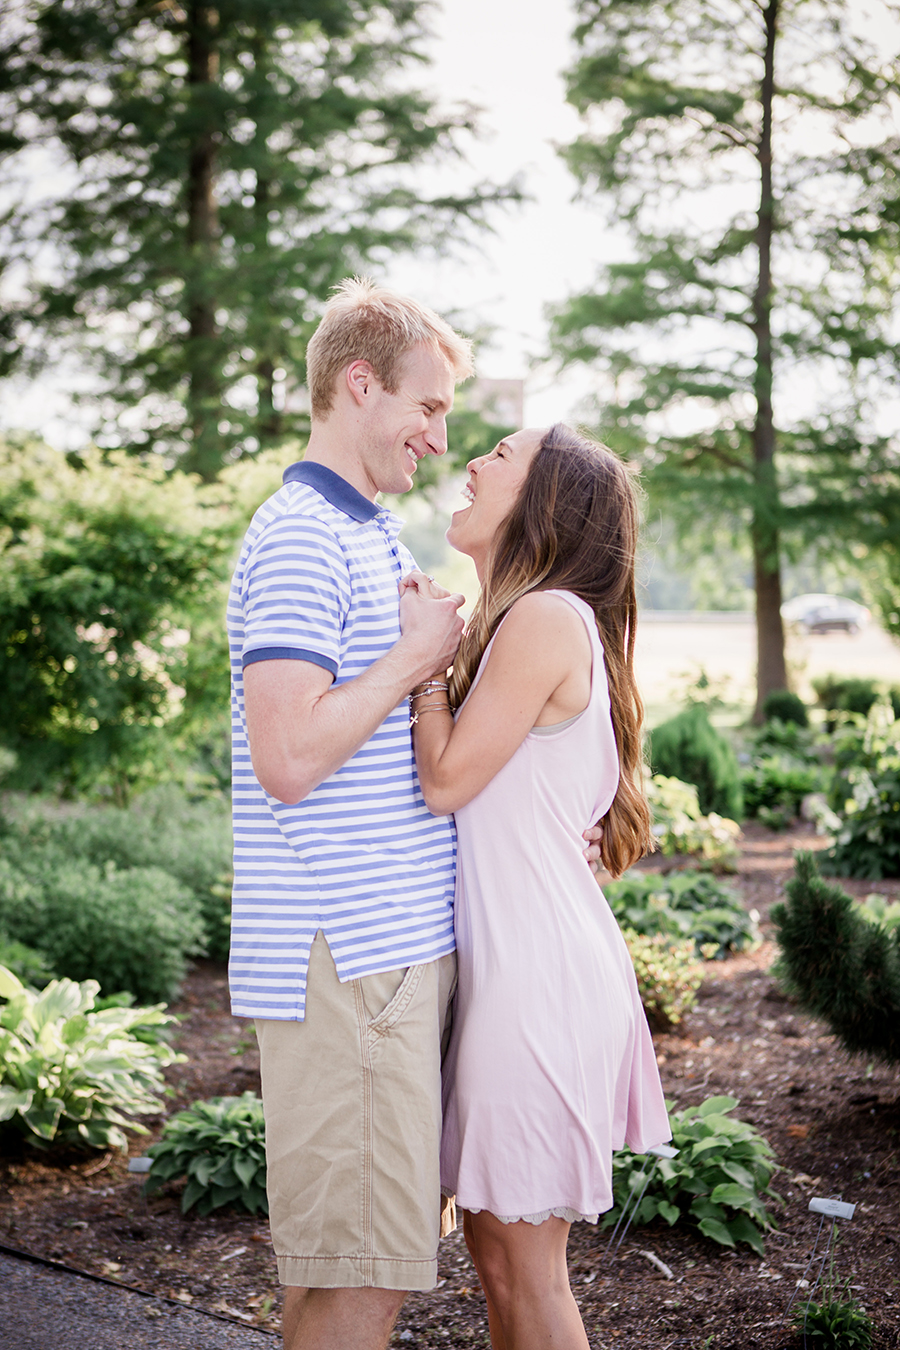 Her mouth open laughing engagement photo by Knoxville Wedding Photographer, Amanda May Photos.